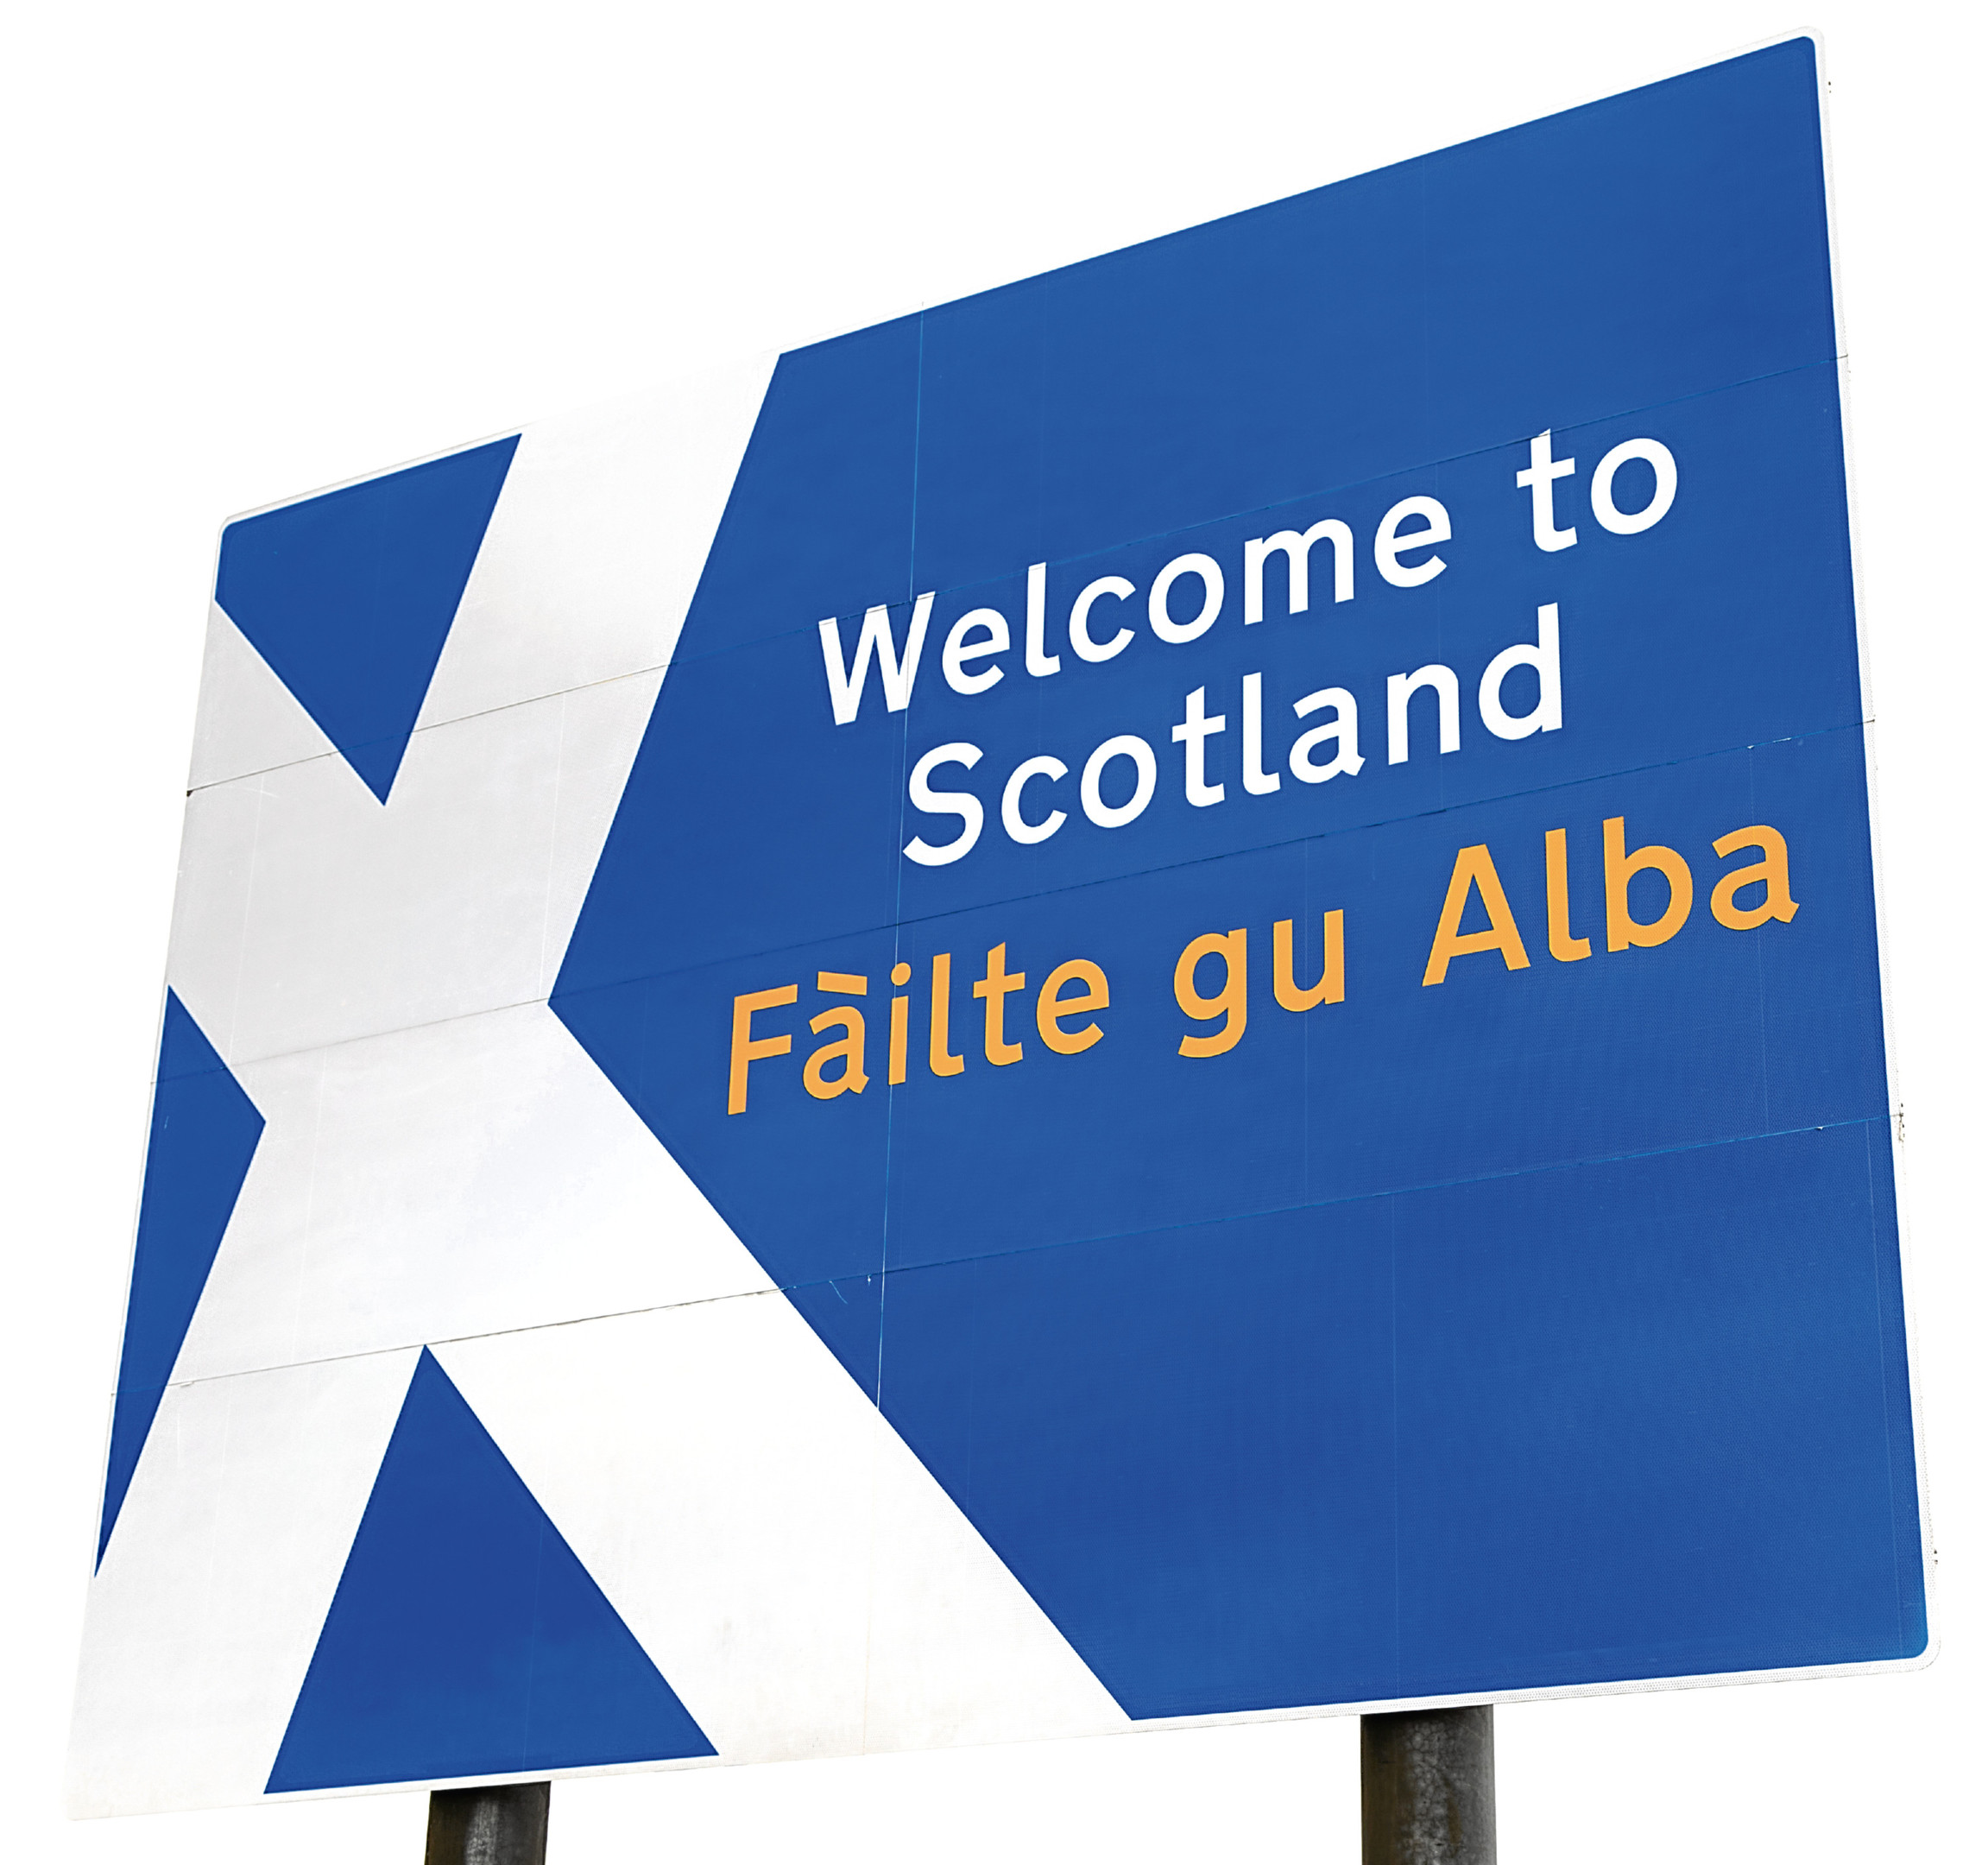 A sign on the border crossing to Scotland from England.